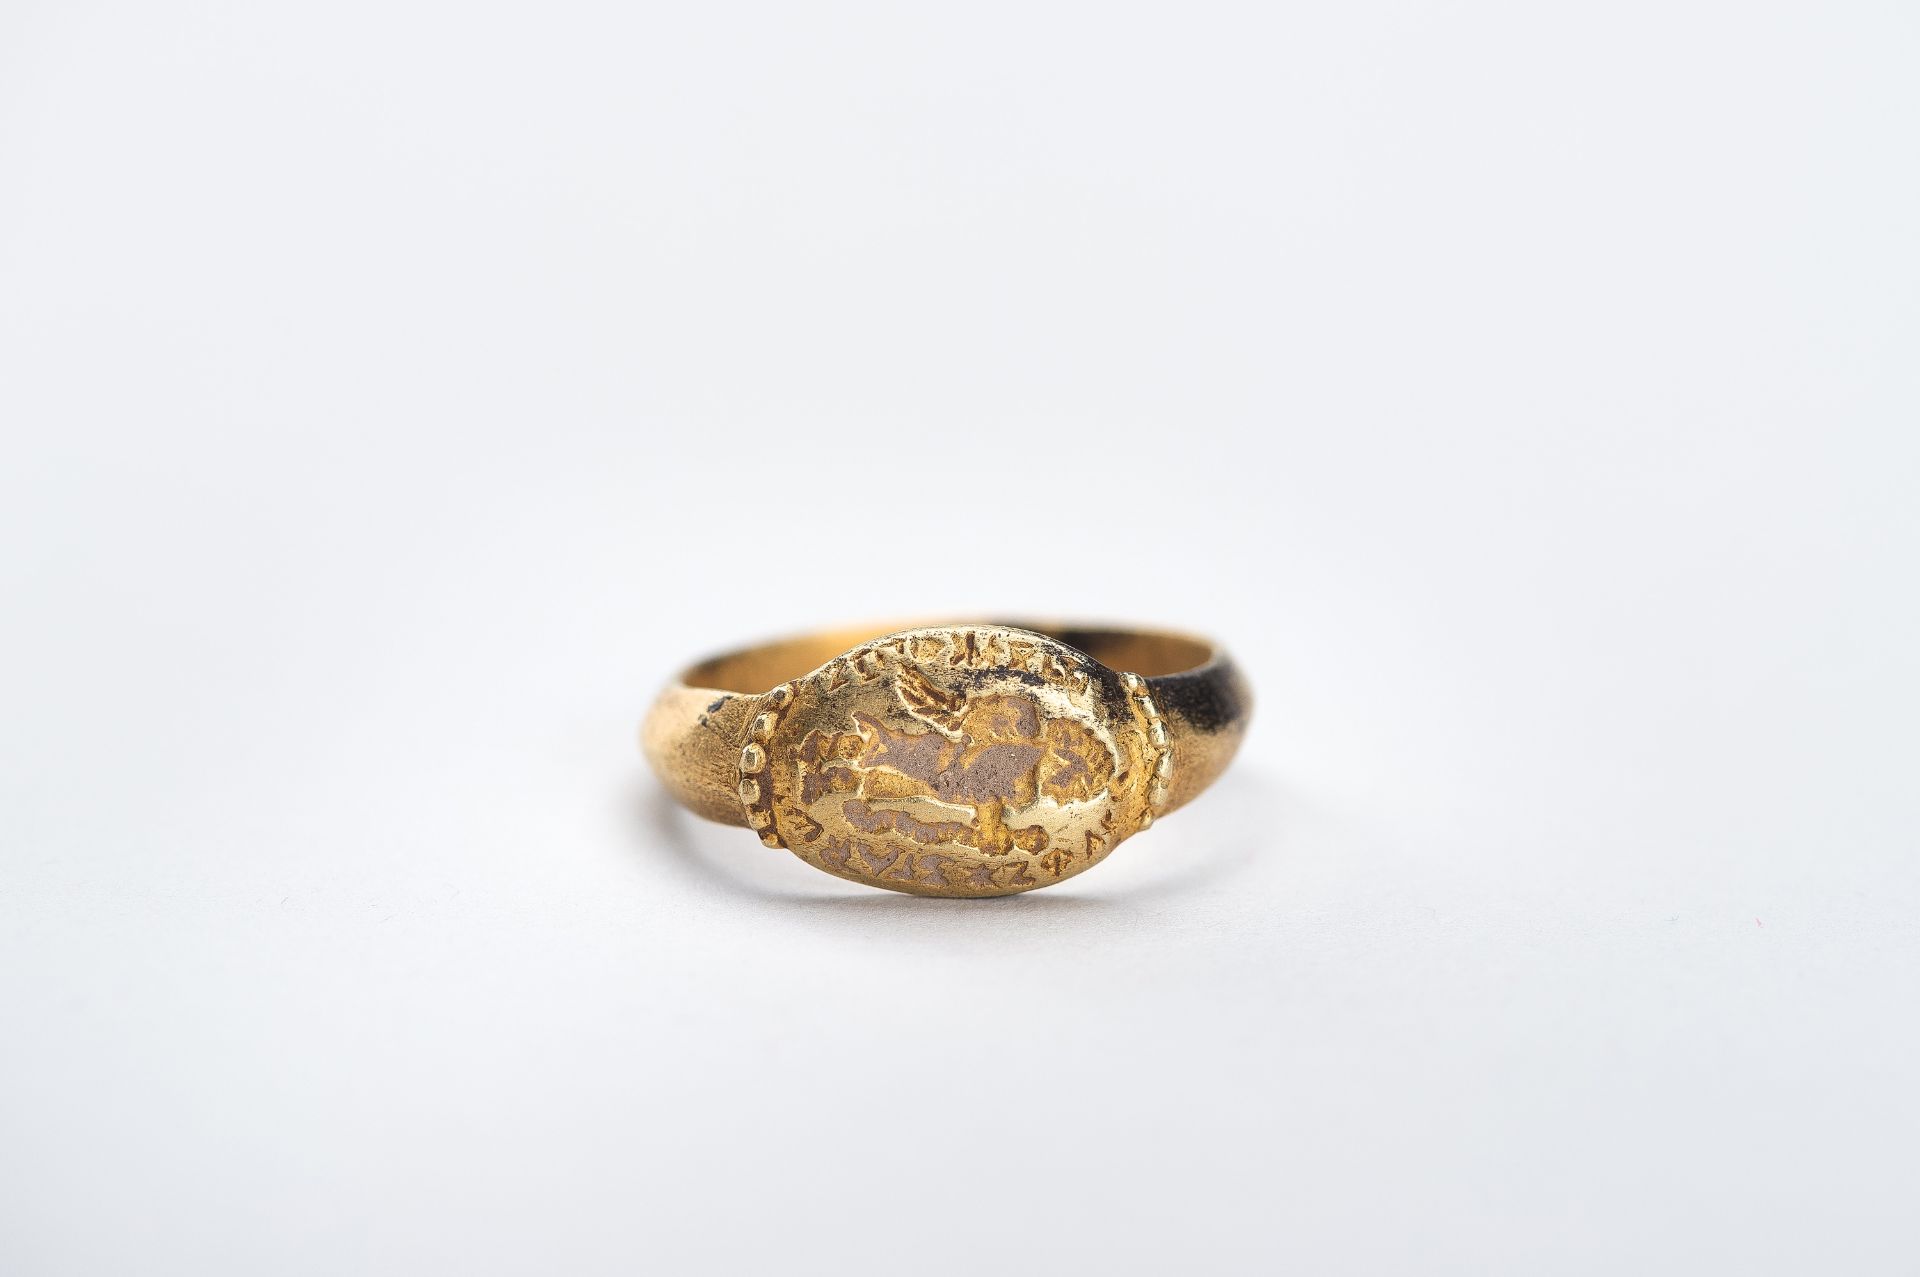 AN ANCIENT BACTRIAN GOLD SEAL RING - Image 2 of 10